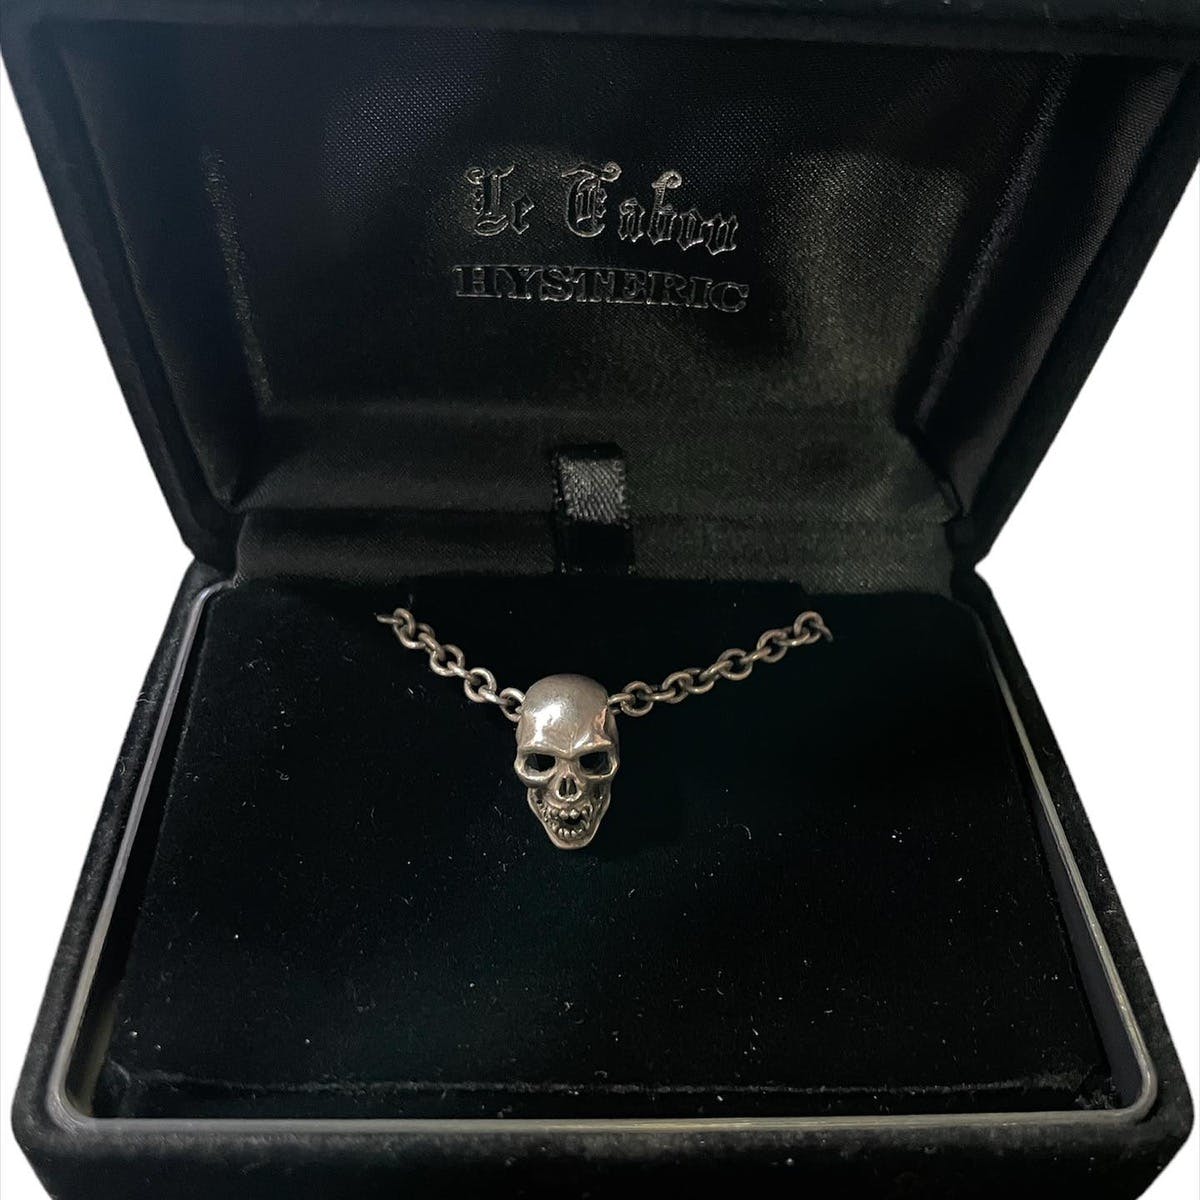 Hysteric x Le Tabou Skull Necklace - 3